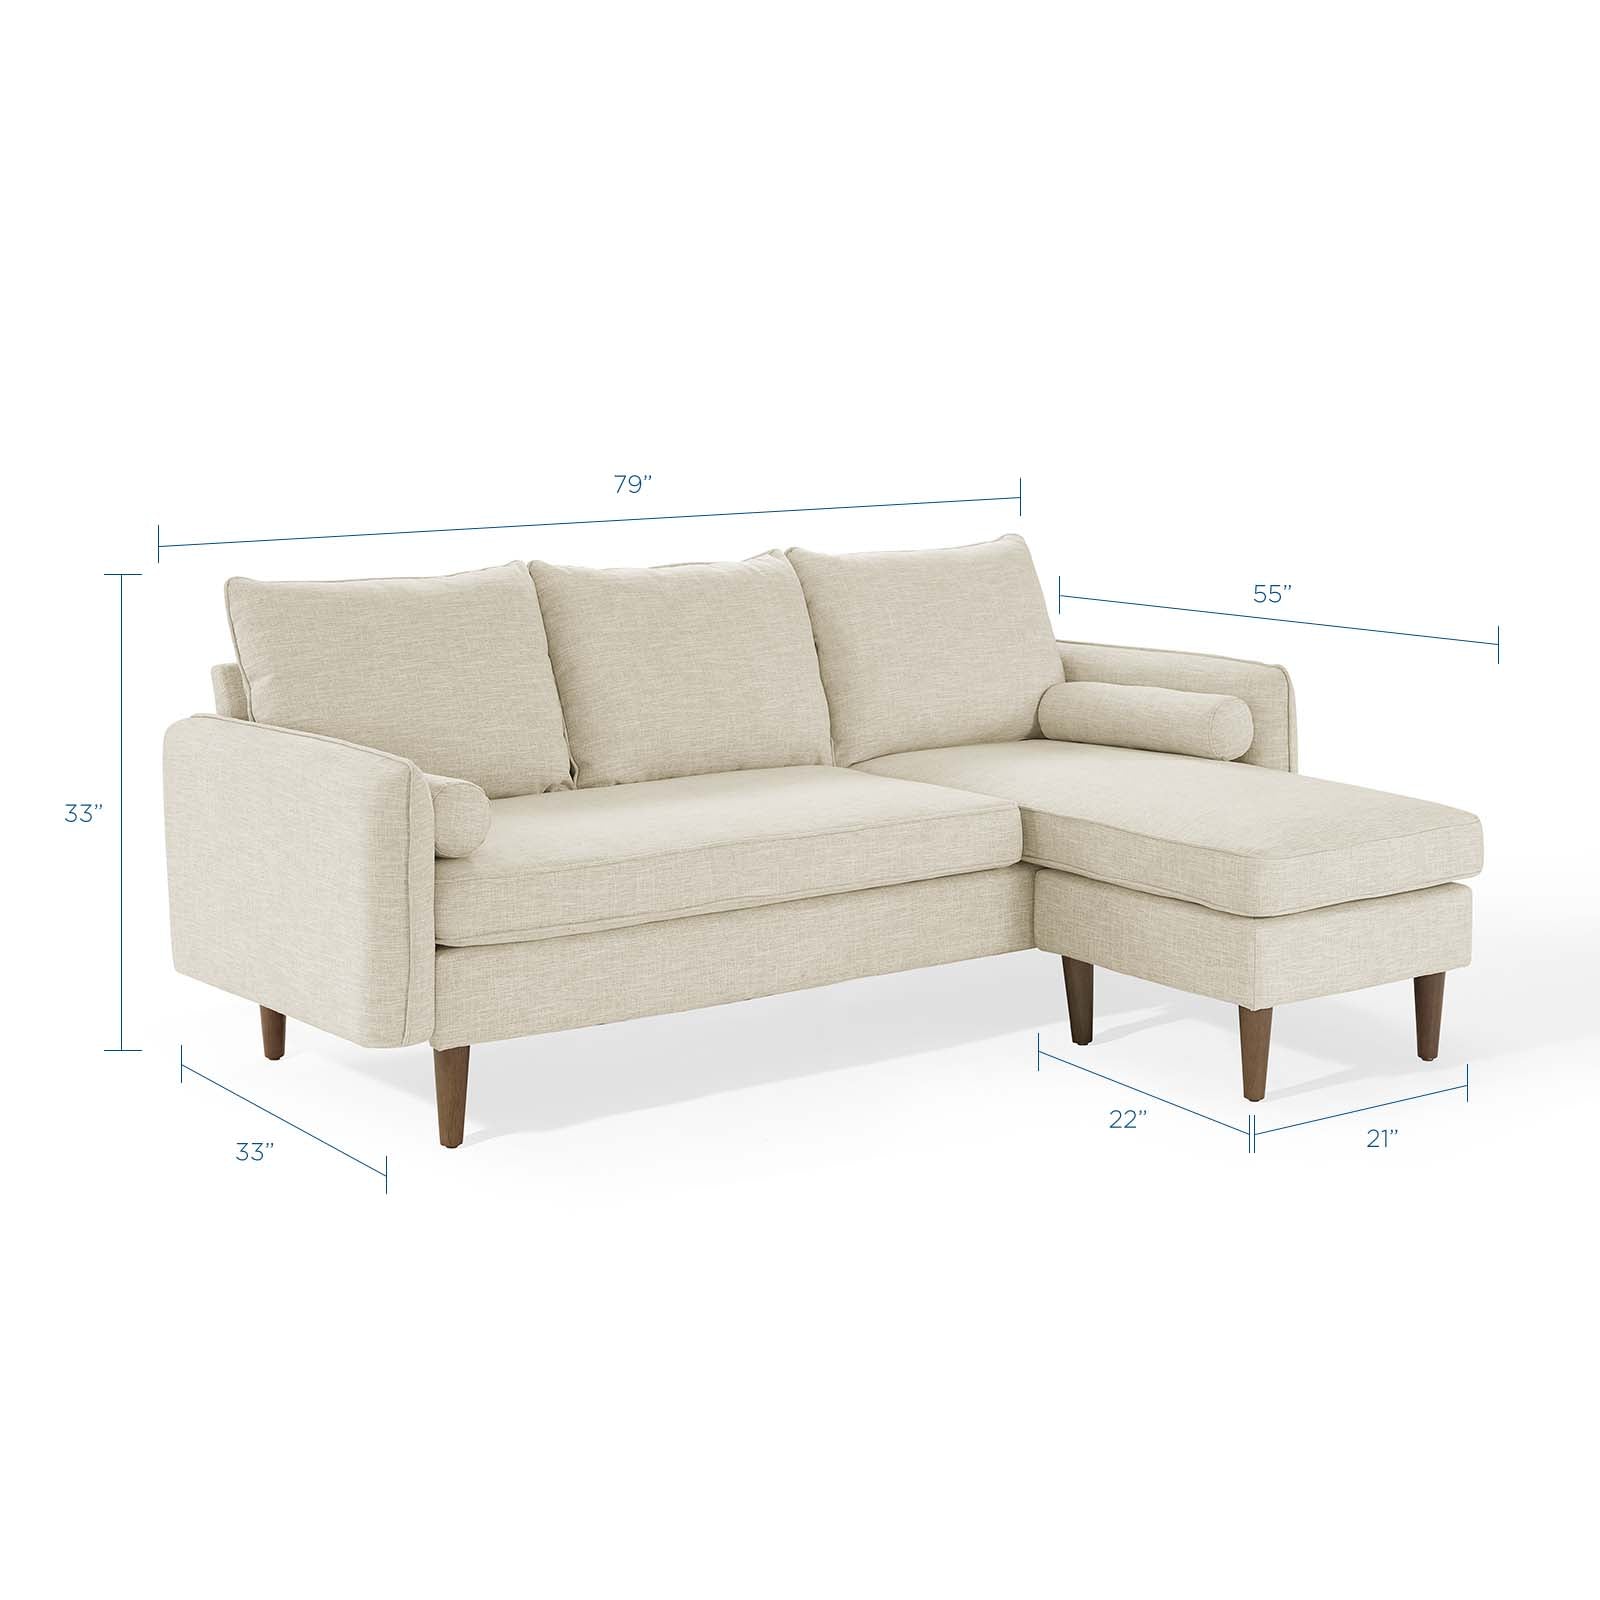 Modway Sectional Sofas - Revive Reversible Sectional Sofa Beige